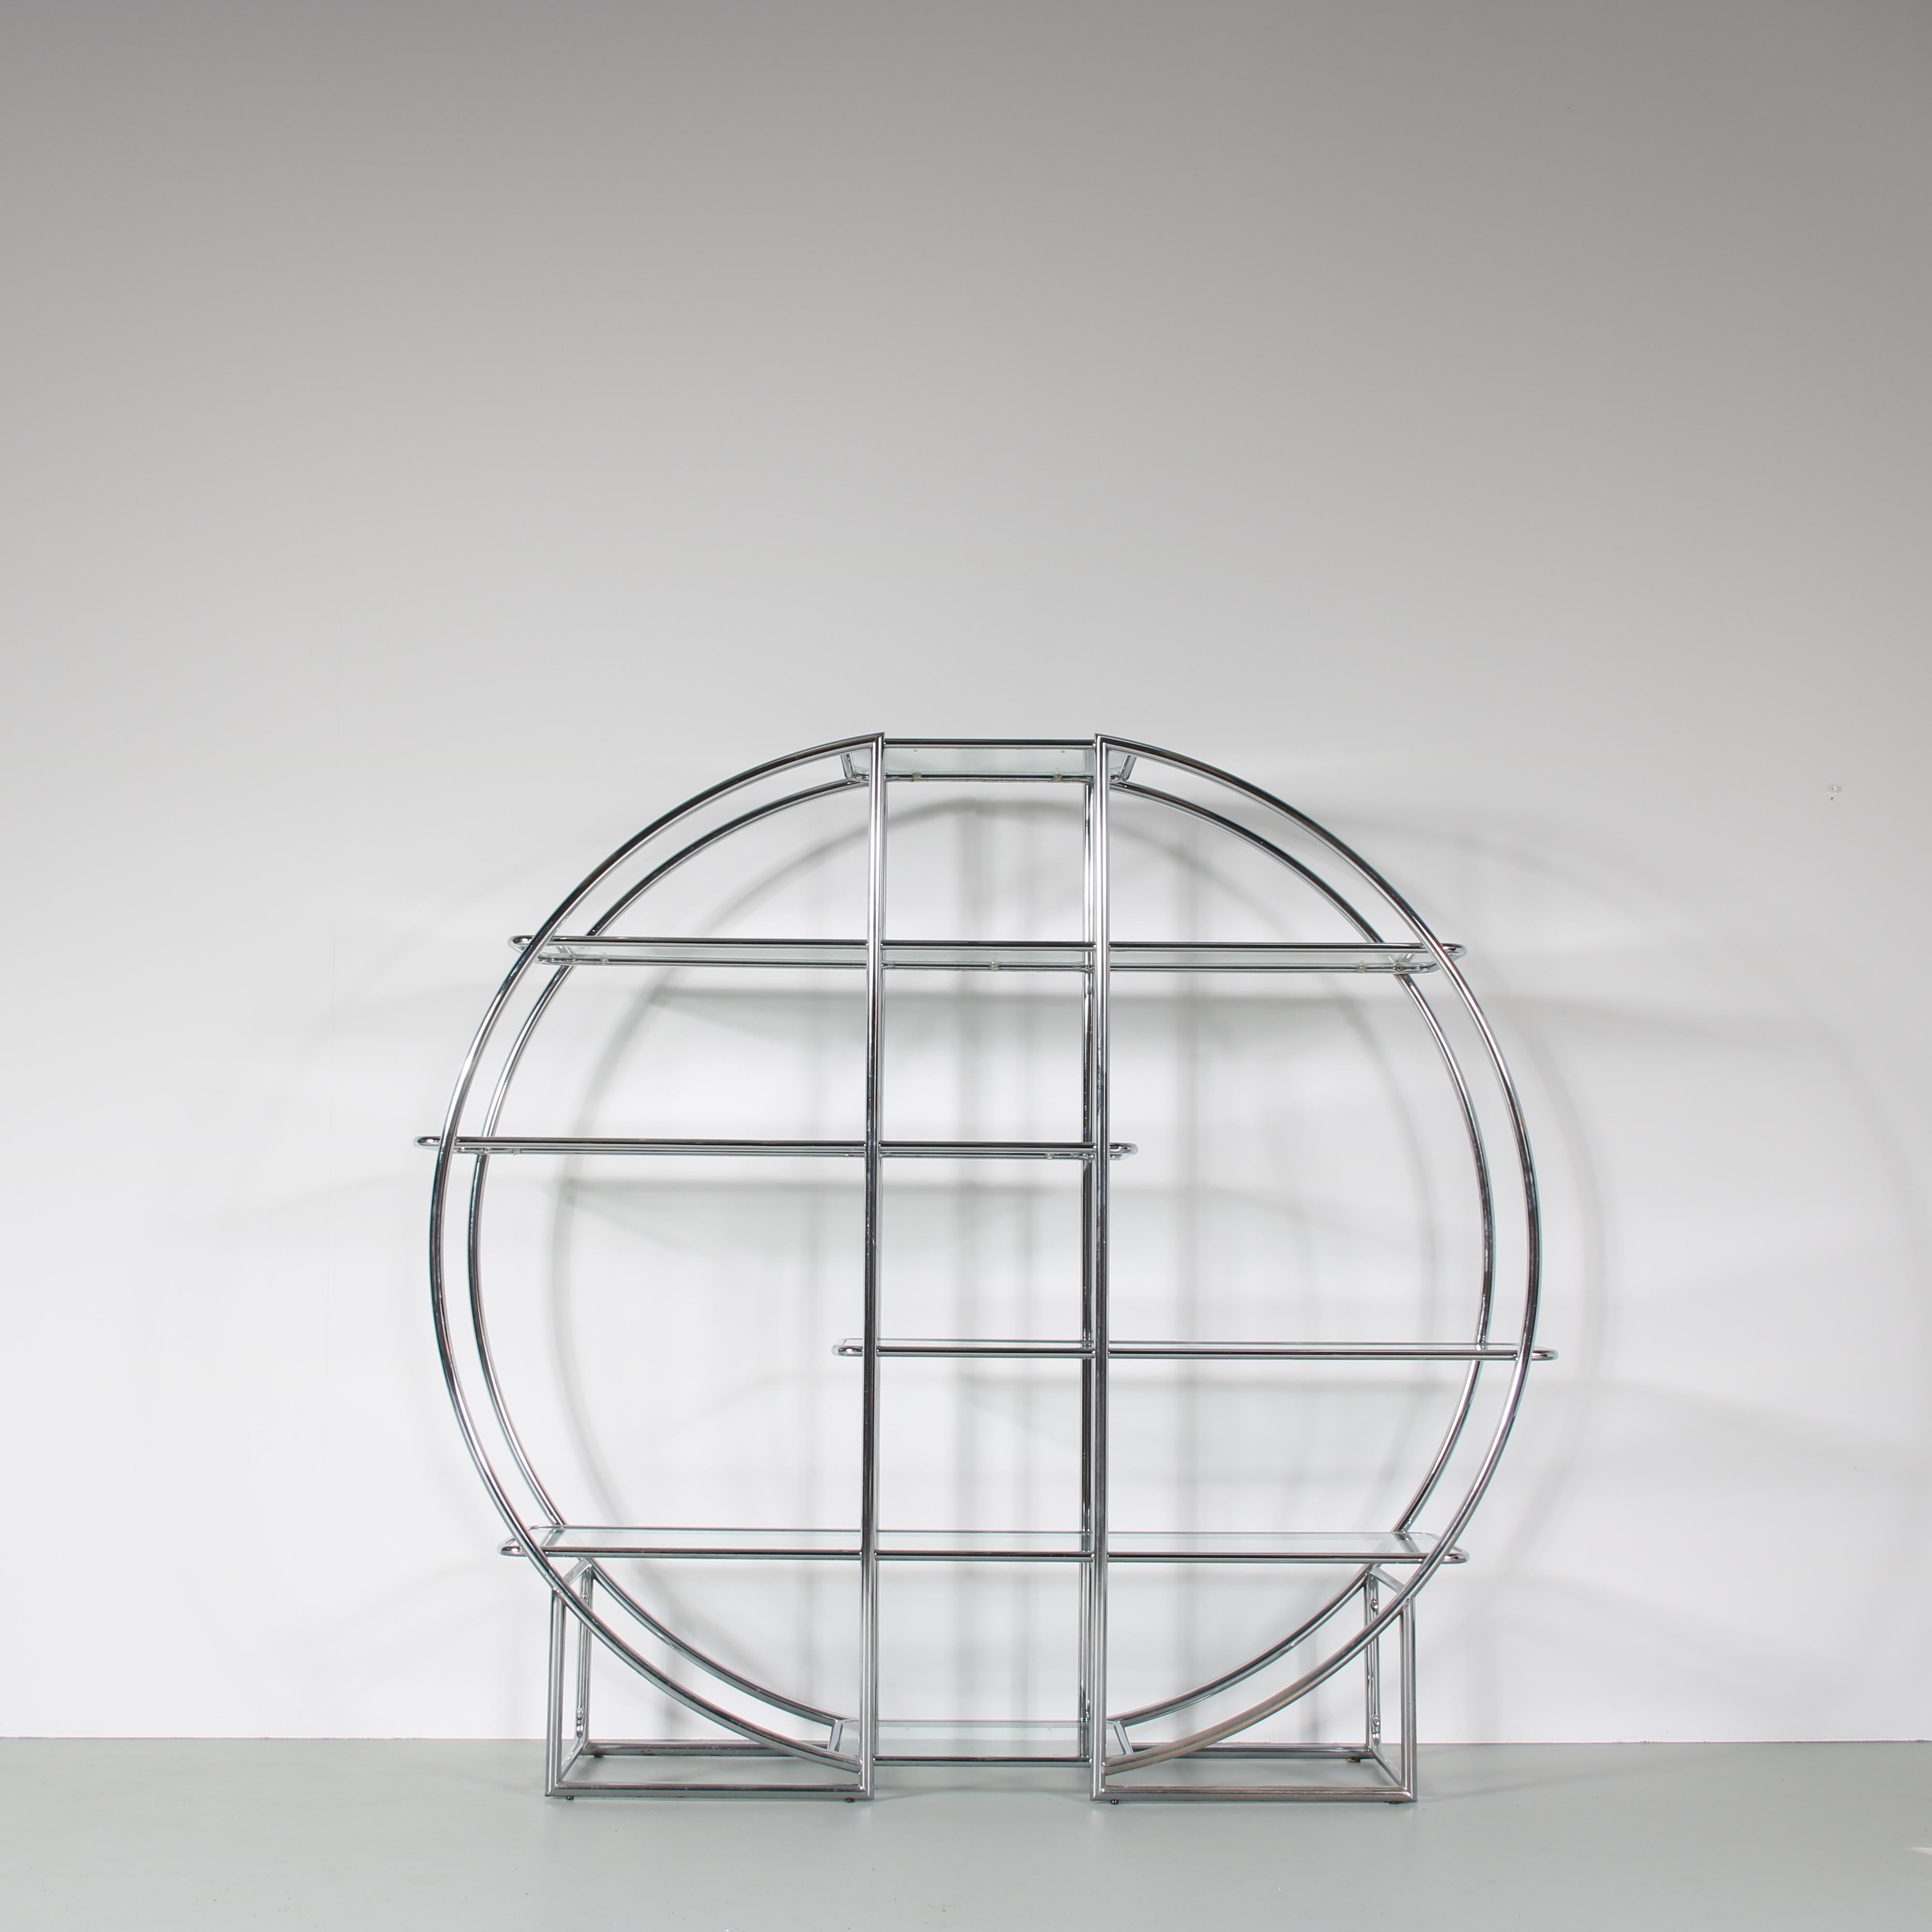 A wonderful art deco style display cabinet, manufactured in France around 1960.

This impressive piece is made of high quality tubular chrome plated metal with glass shelves. It has a beautiful style, different from every angle! The round frame